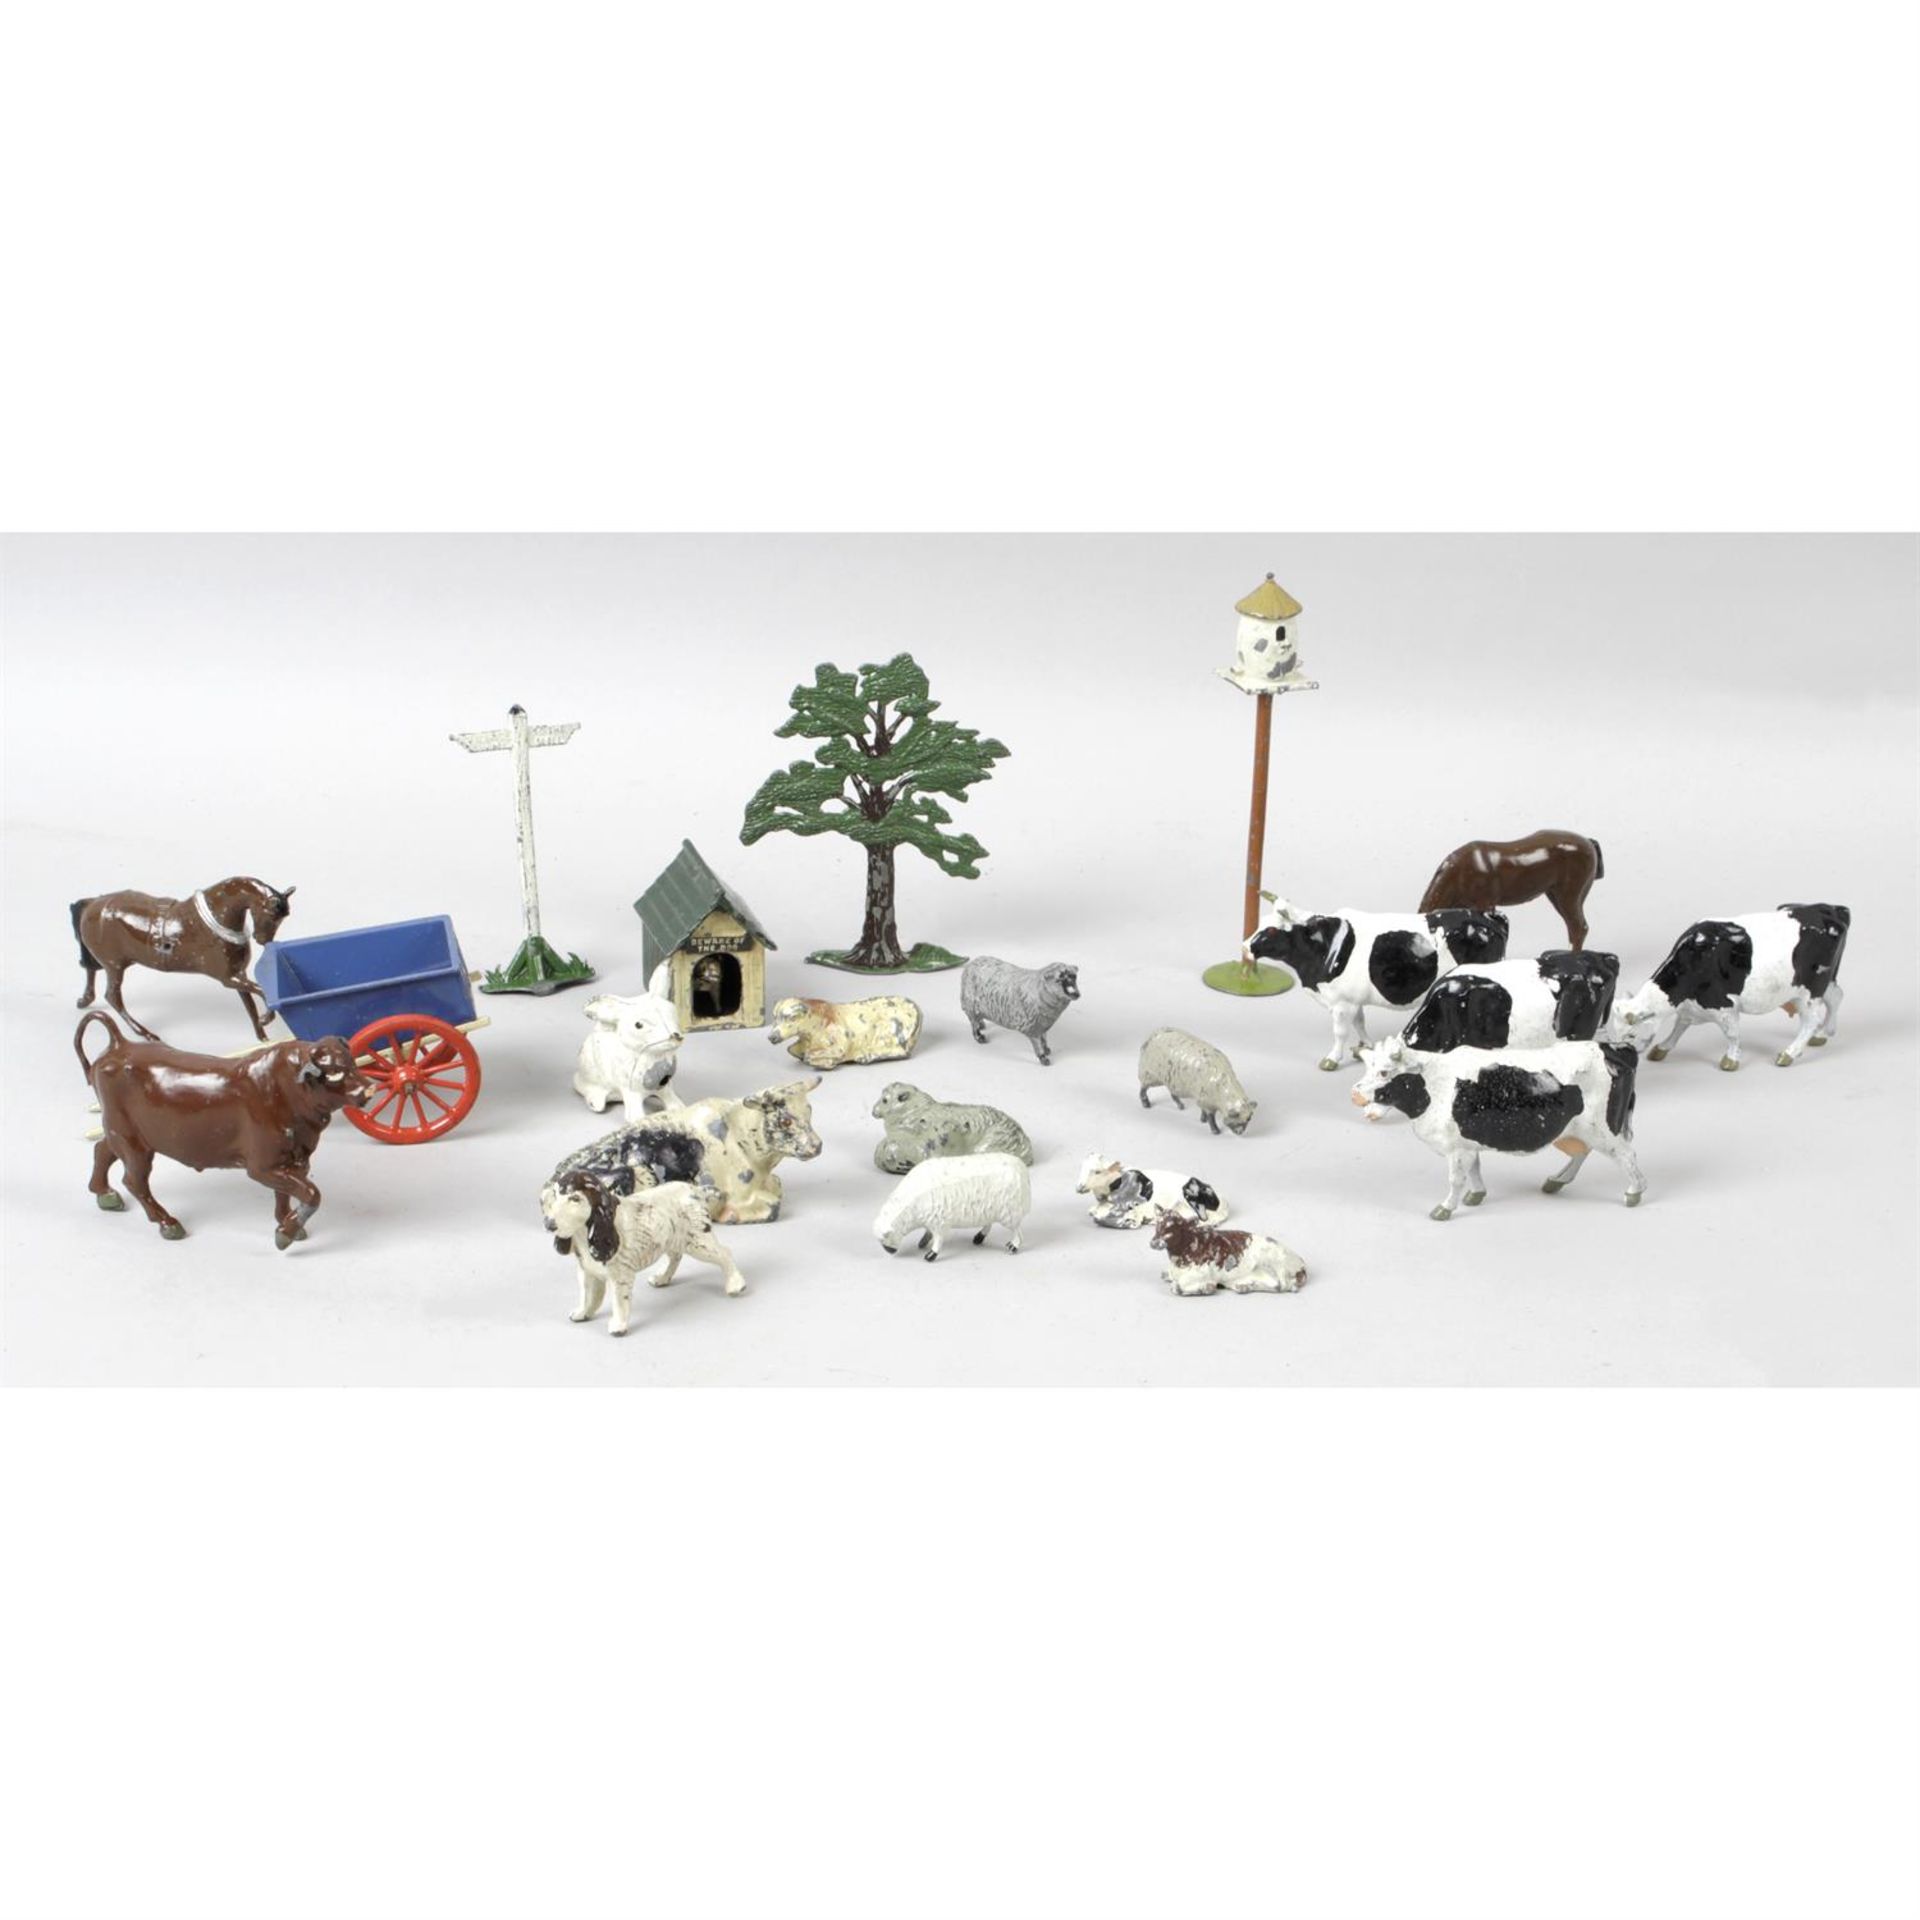 A mixed selection of assorted, hand painted cast metal farm yard animal figures.